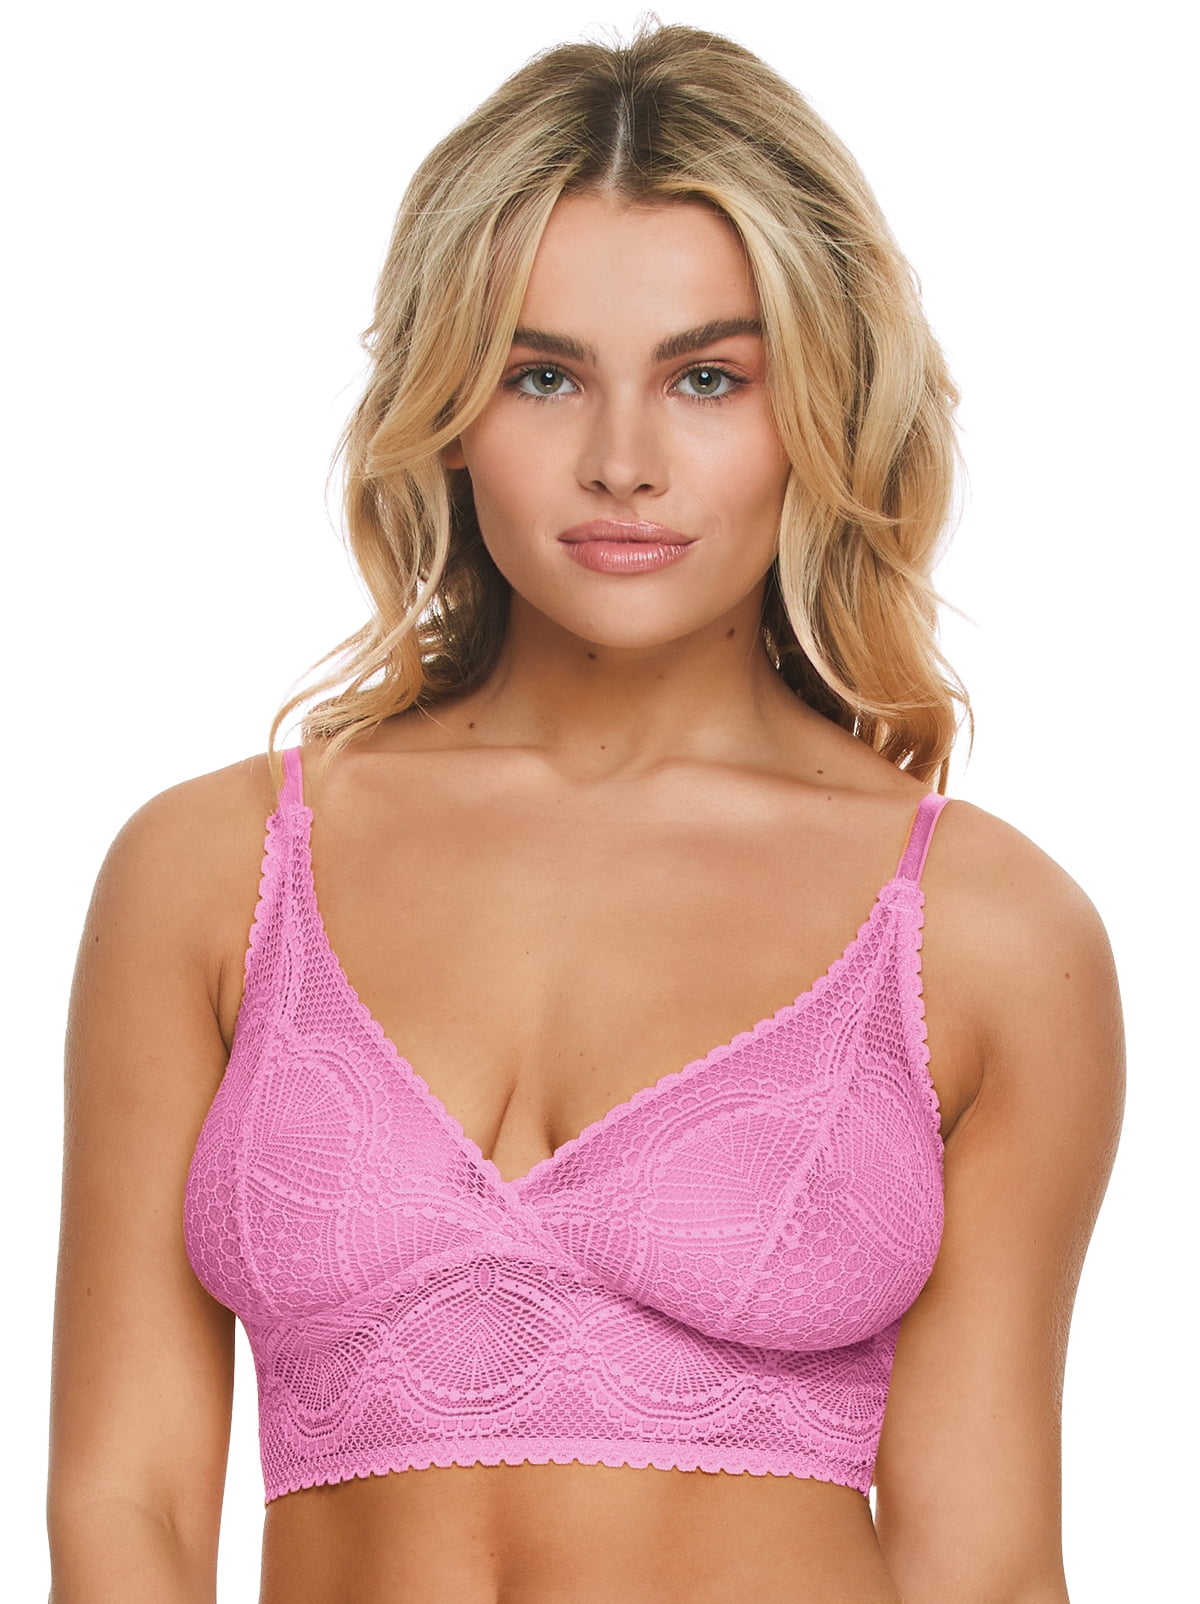 Felina Finesse Cami Bralette - Stretchy Lace Bralettes For Women